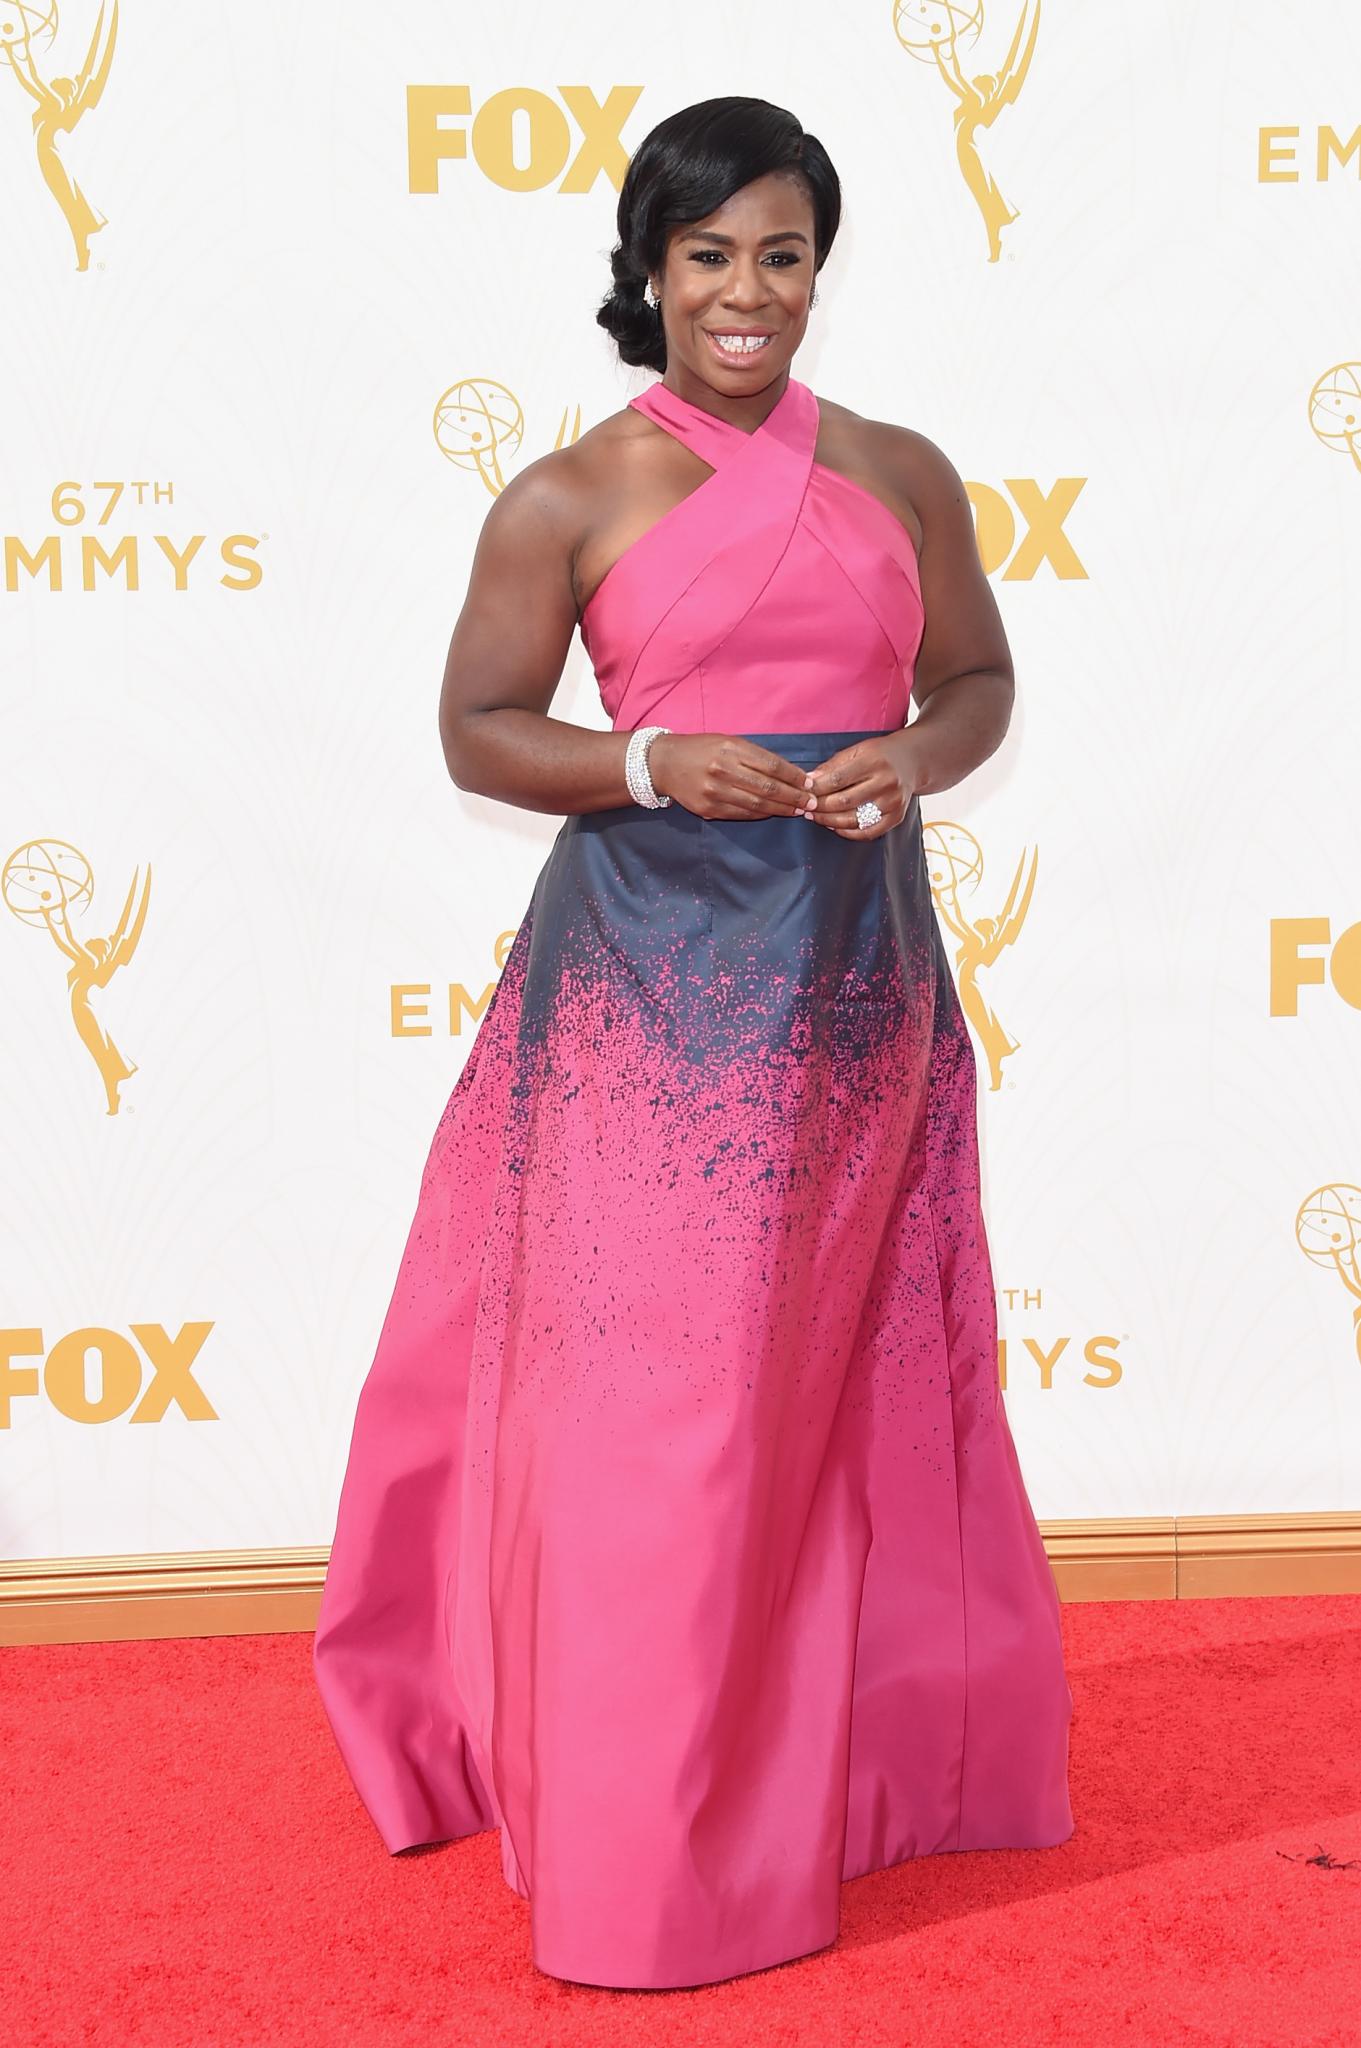 Uzo Aduba Wins Emmy for Best Supporting Actress